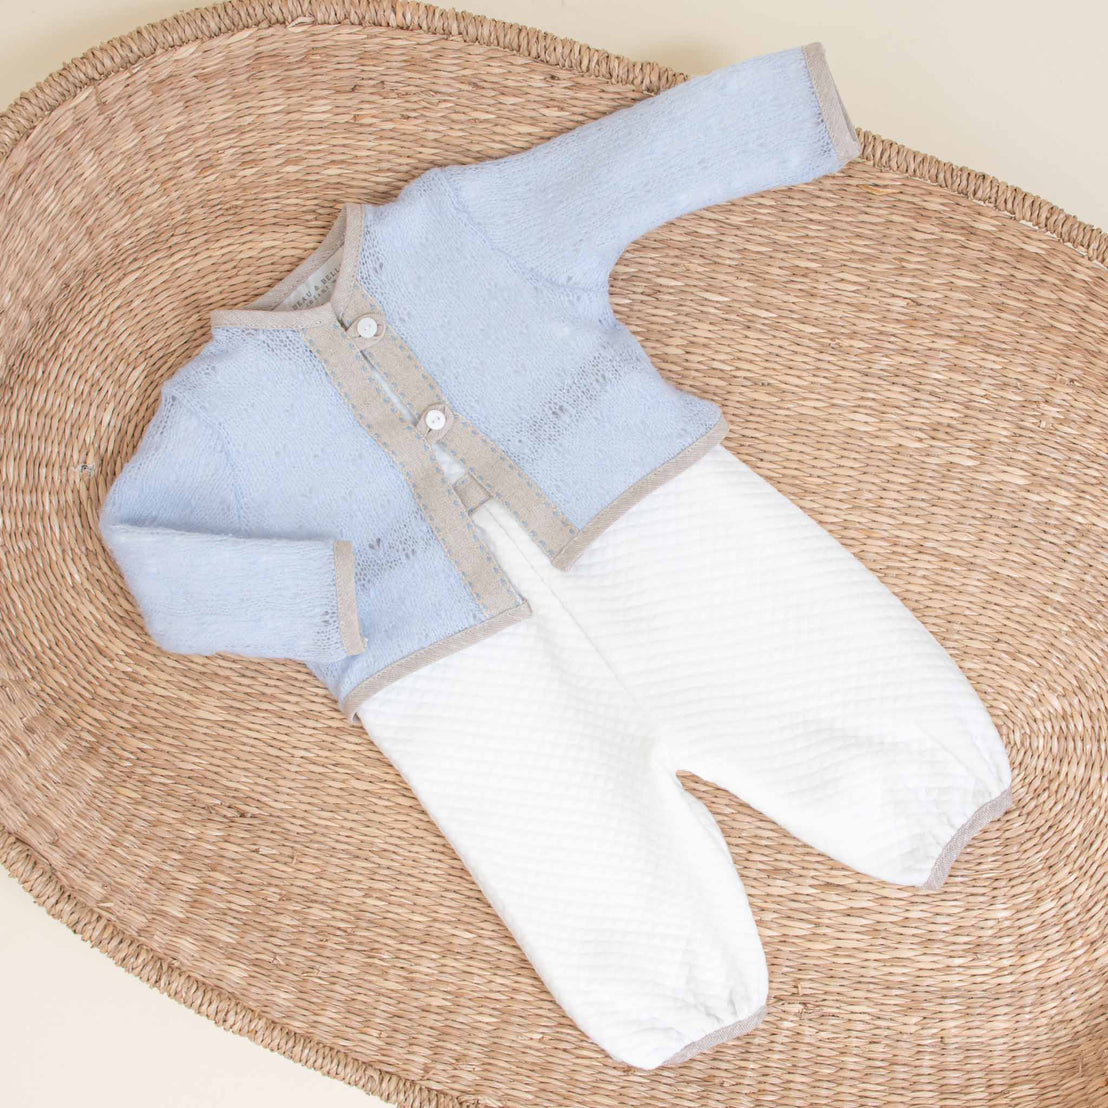 An heirloom baby's coming home two-piece outfit, consisting of an Austin Sweater and white textured pants, displayed on a round rattan mat.